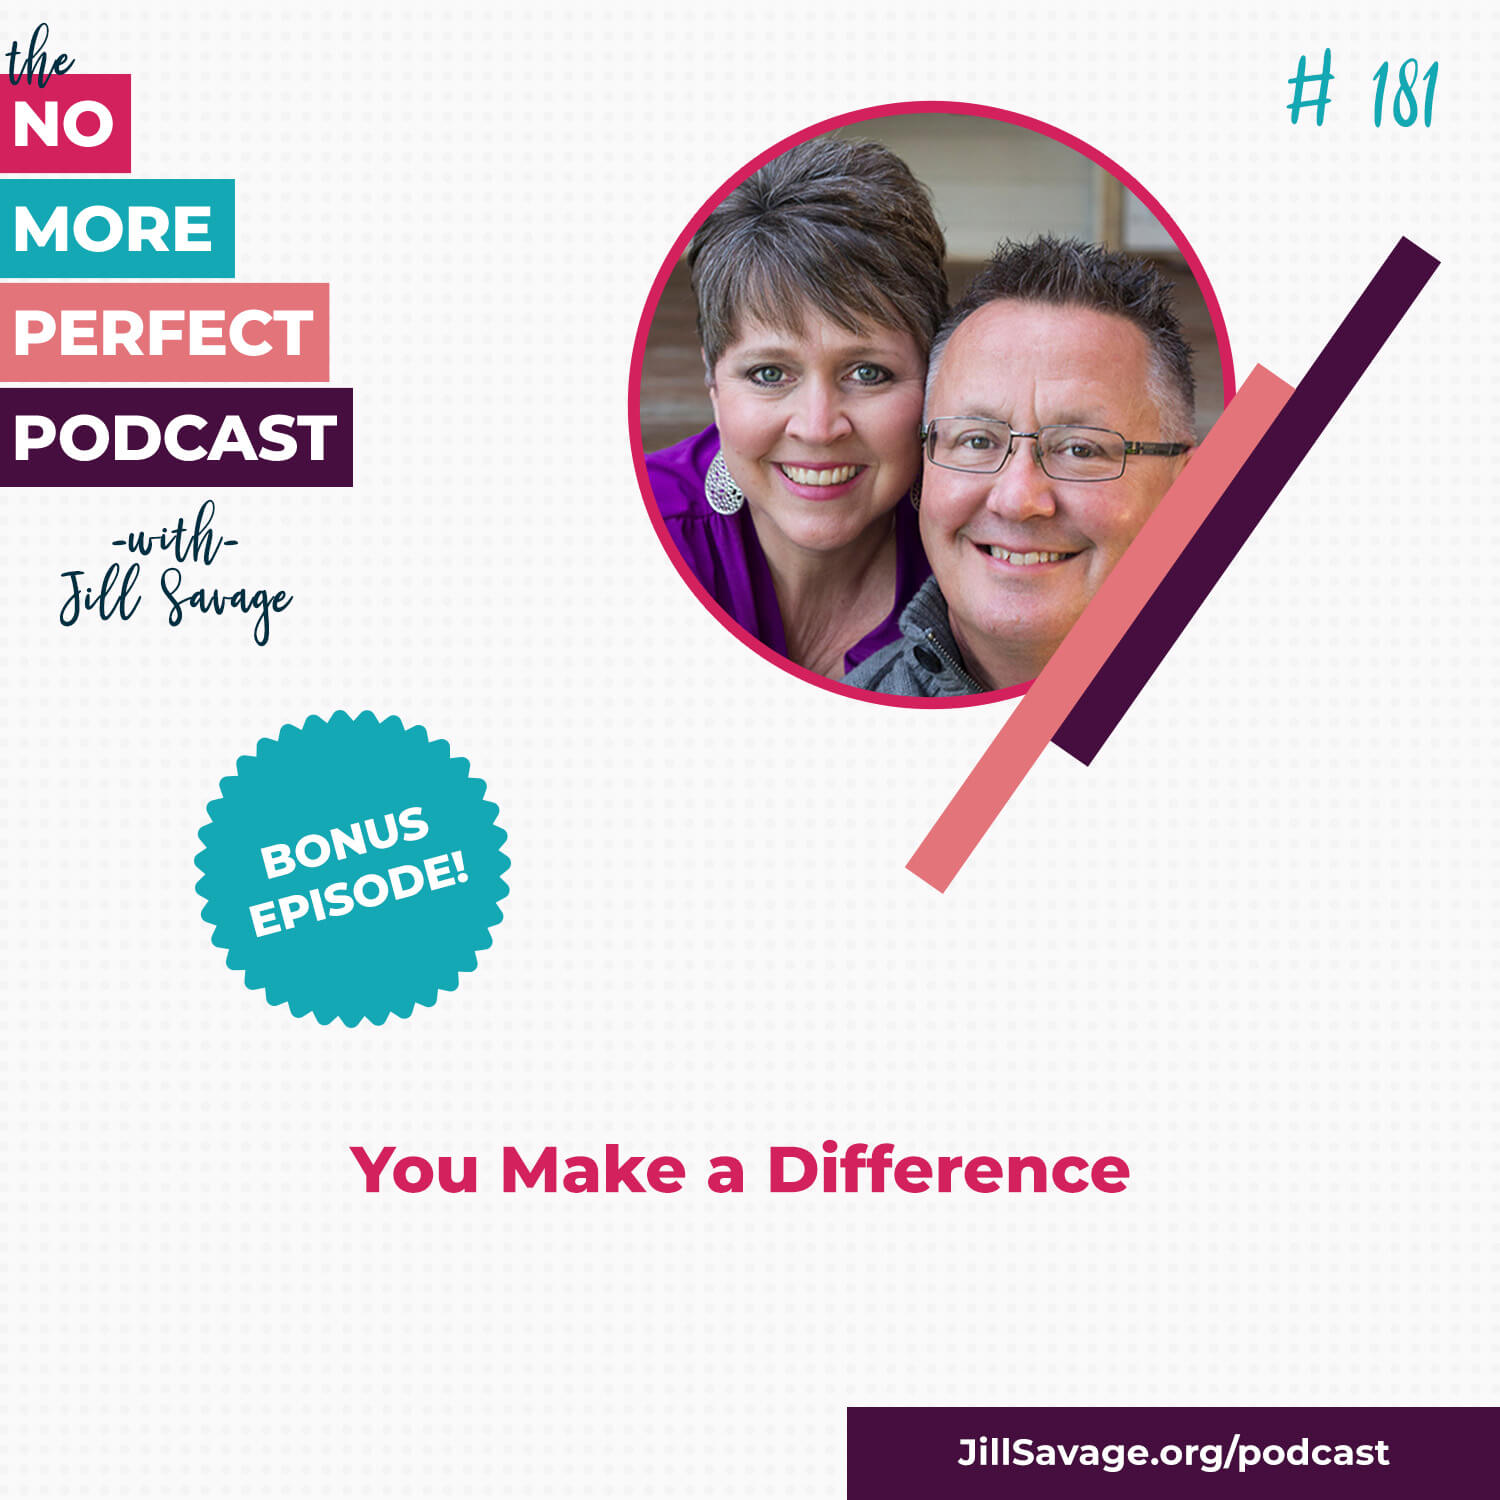 BONUS: You Make a Difference | Episode 181